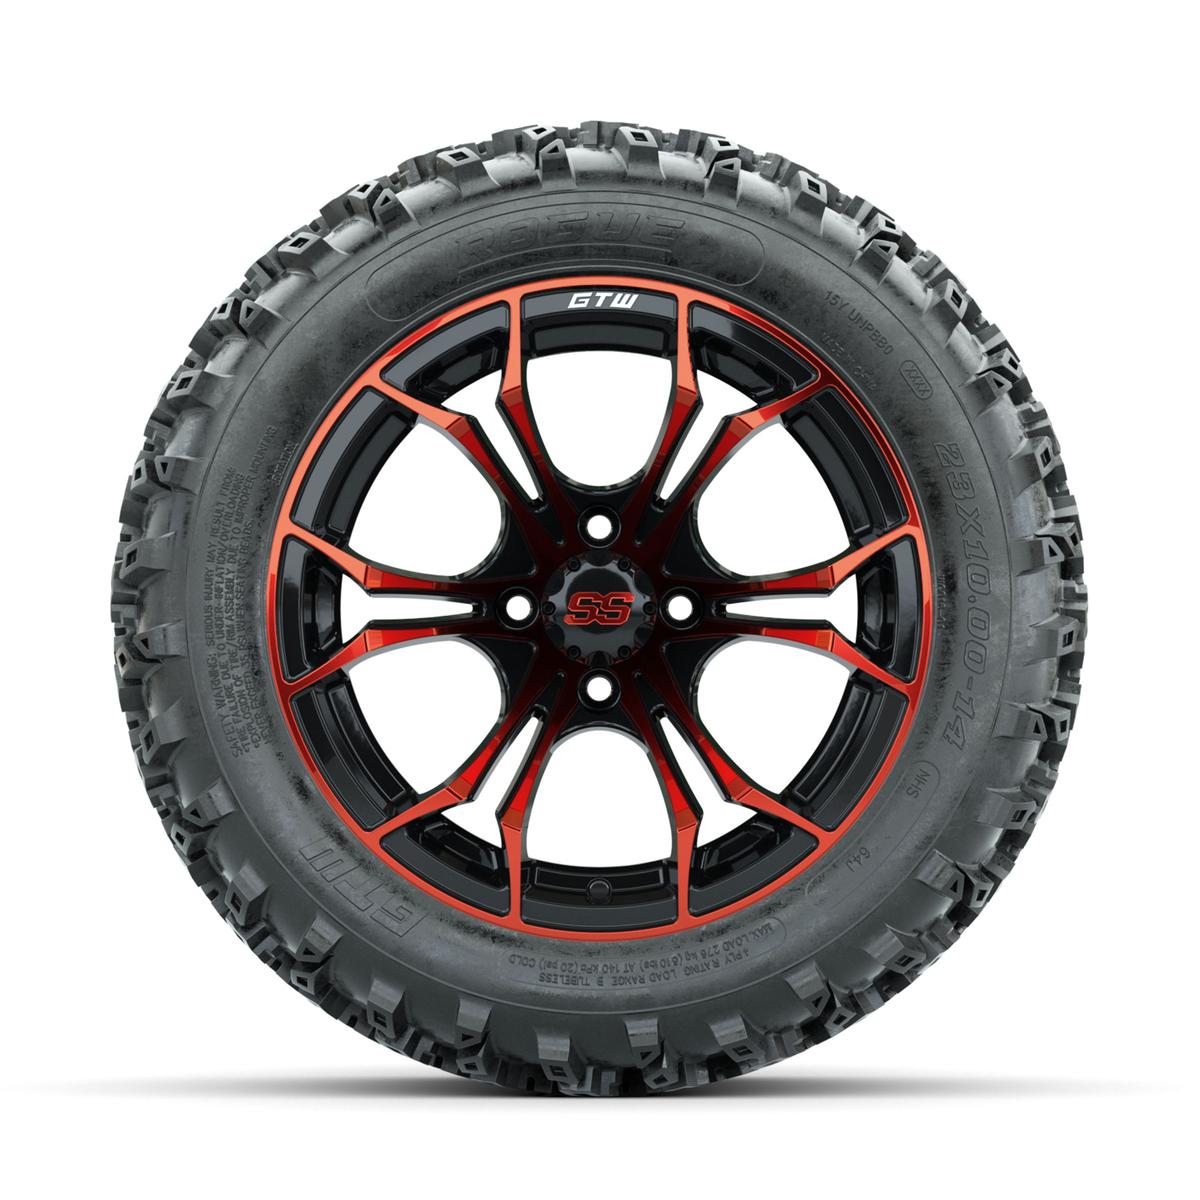 GTW Spyder Red/Black 14 in Wheels with 23x10.00-14 Rogue All Terrain Tires – Full Set